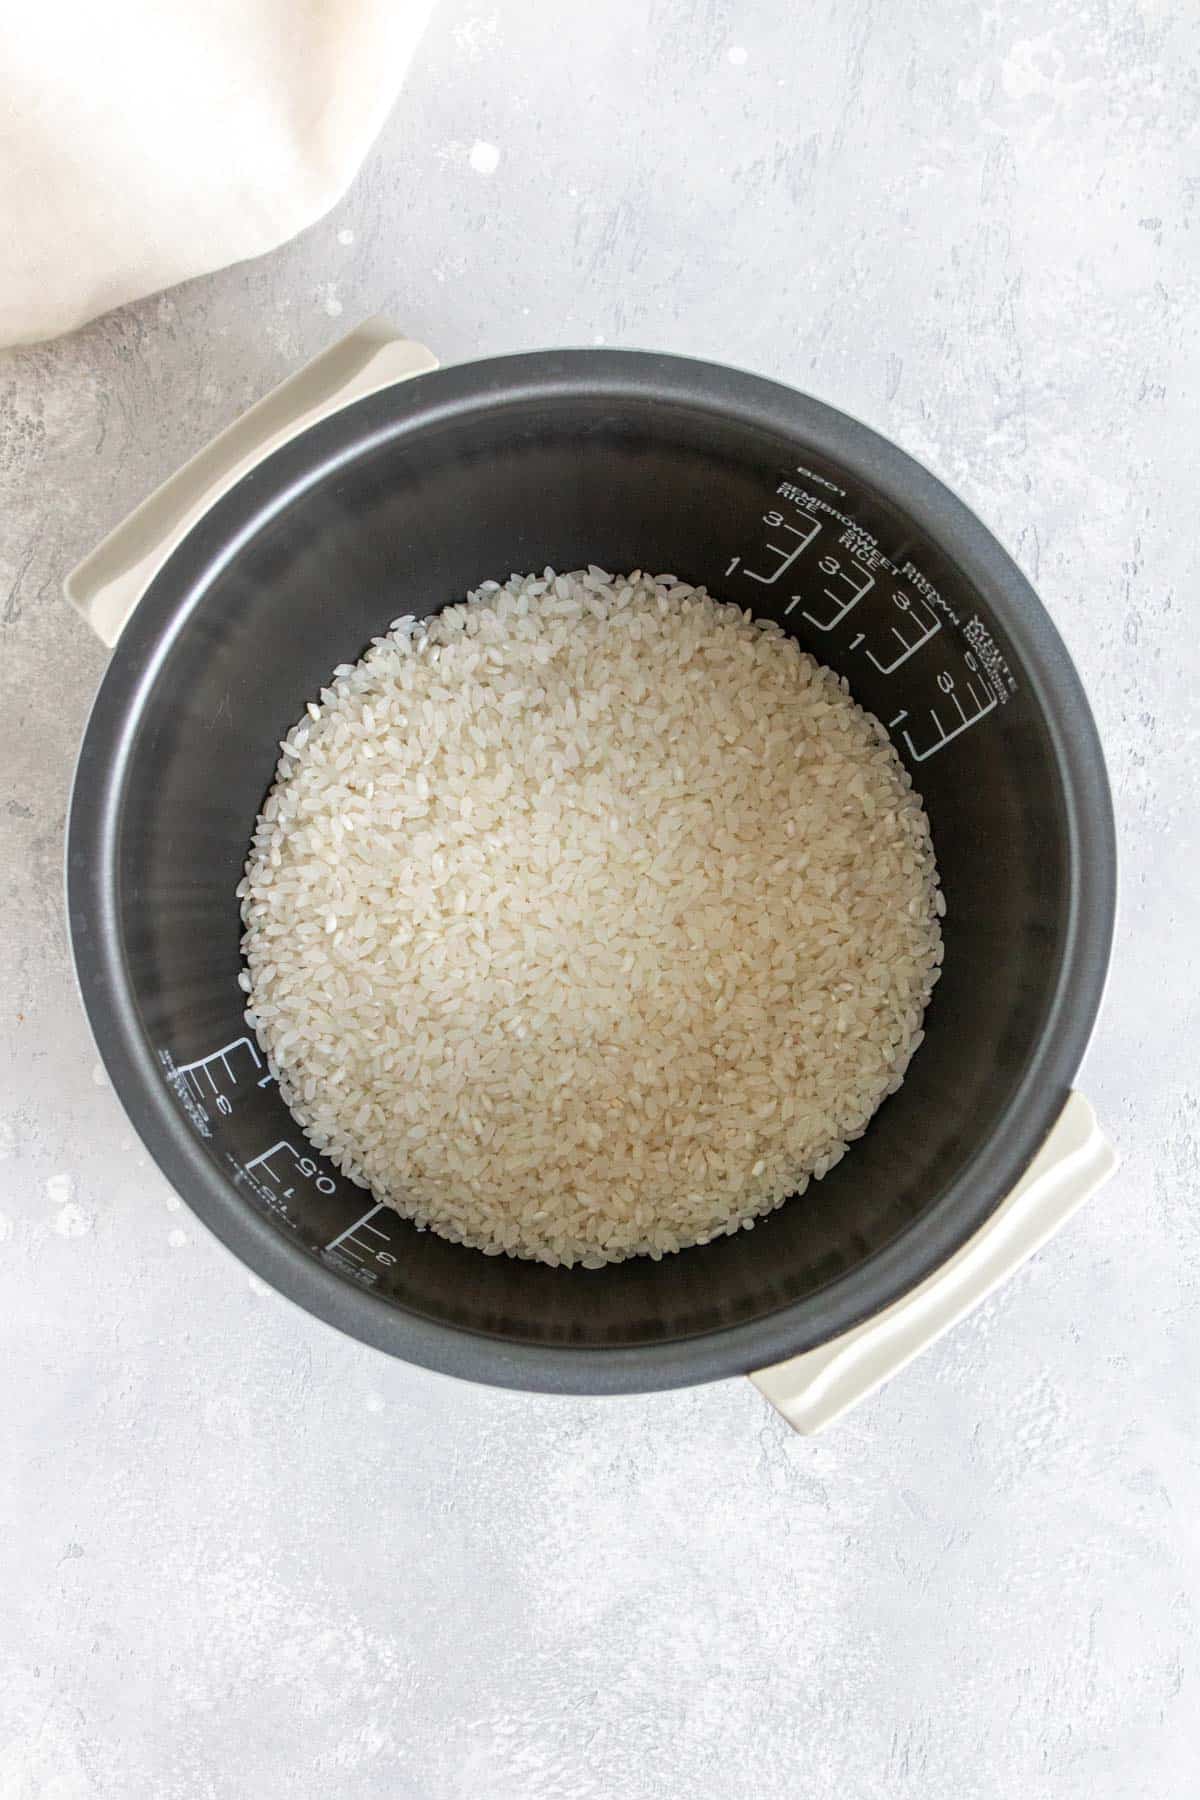 Uncooked rice in a rice cooker.